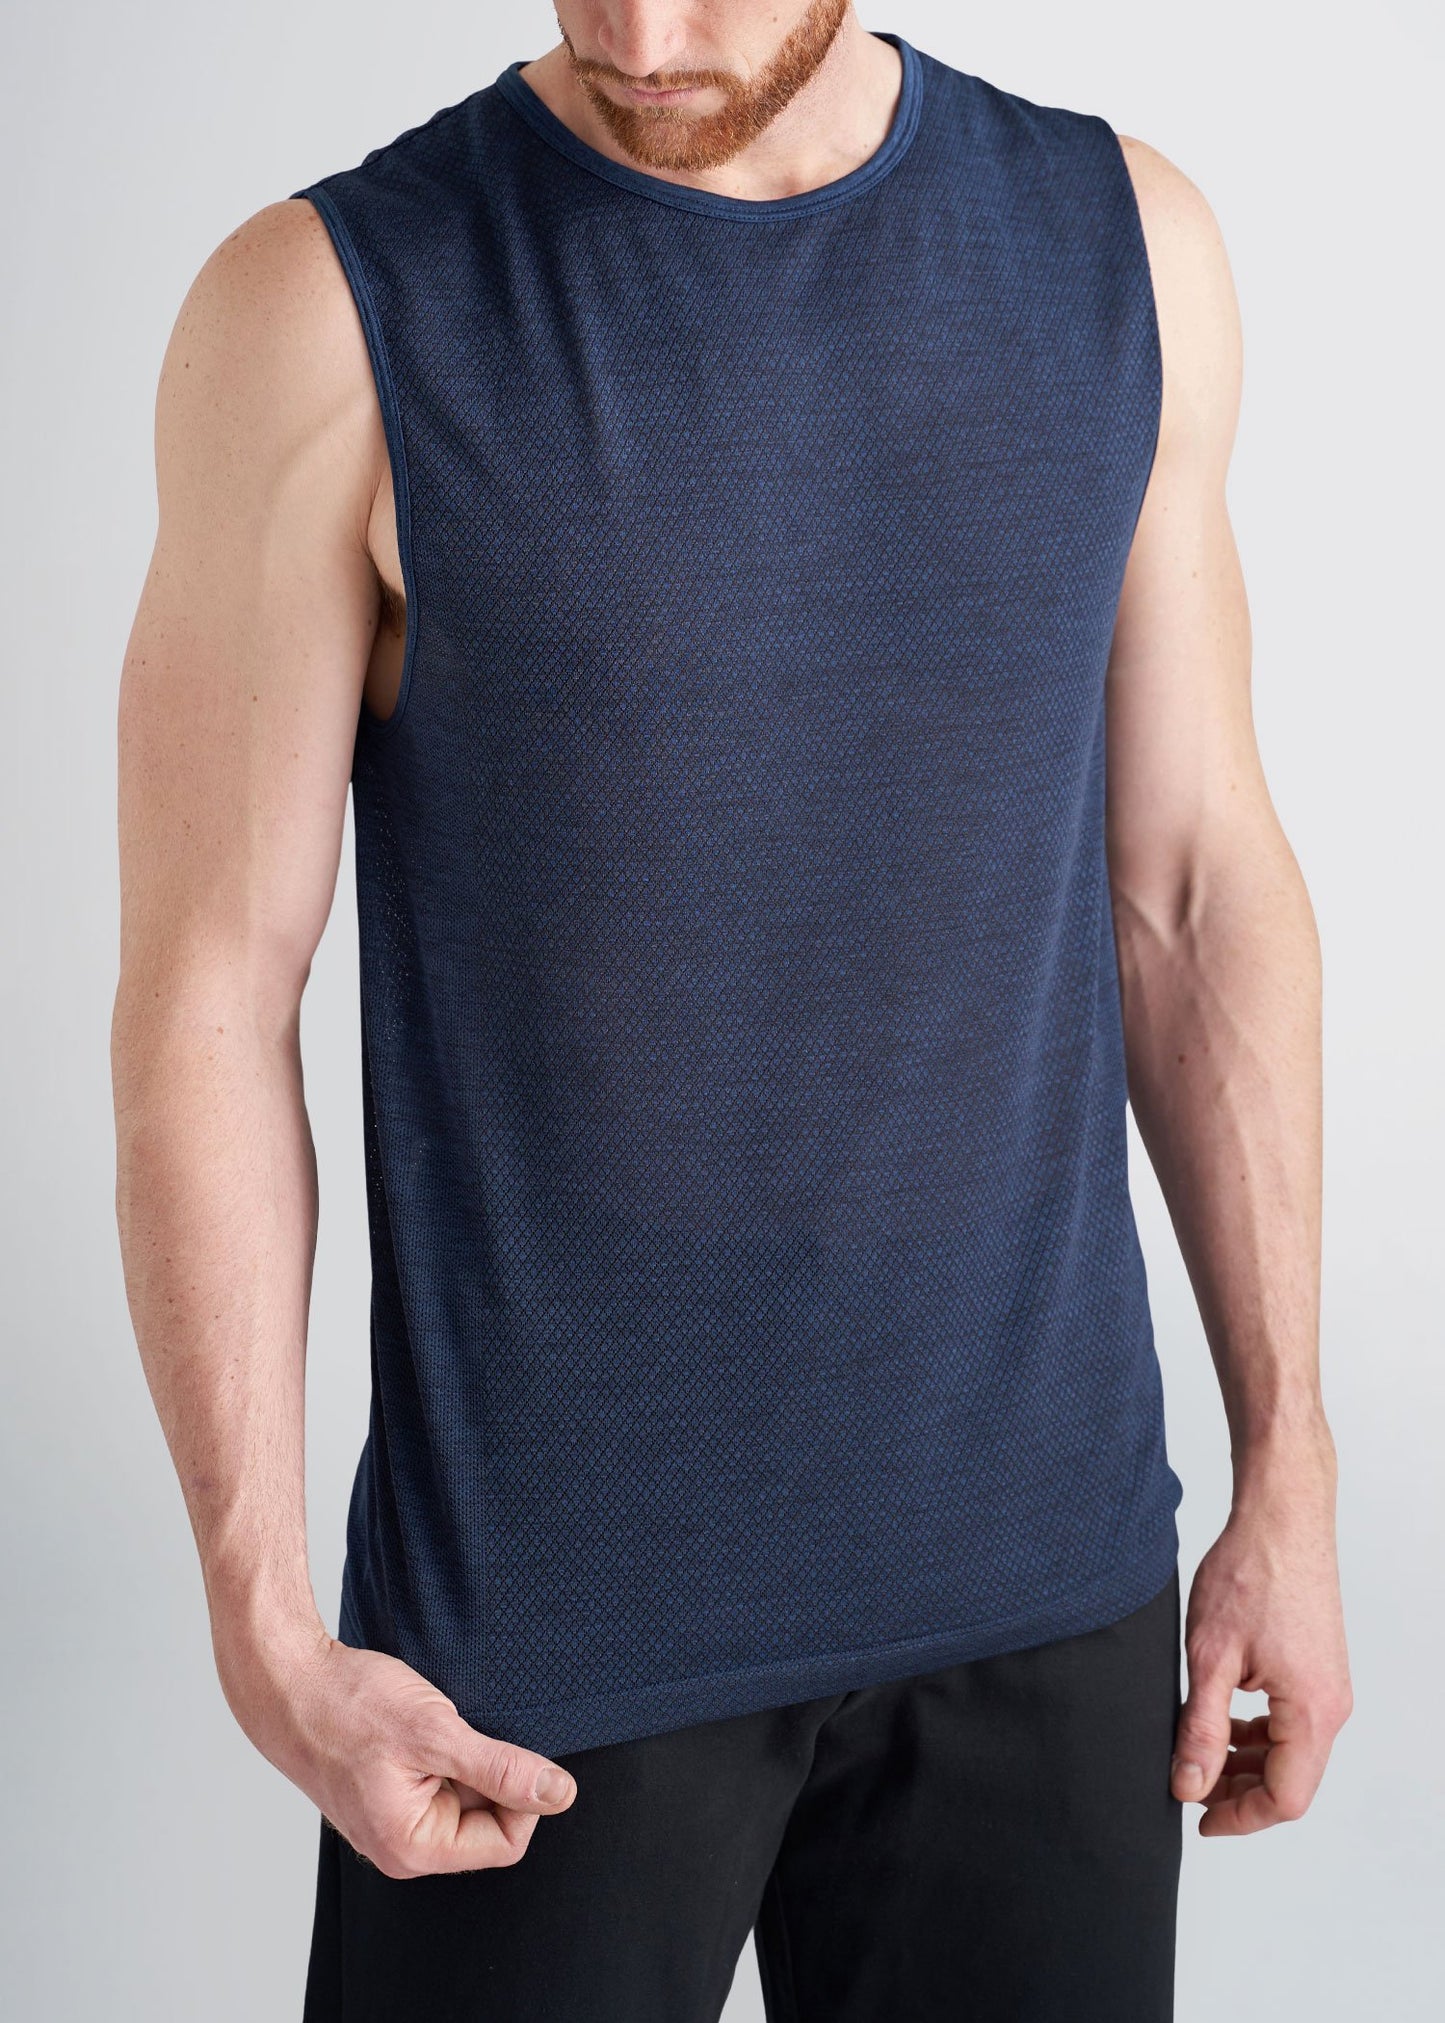 american-tall-mens-performance-tank-navymix-front